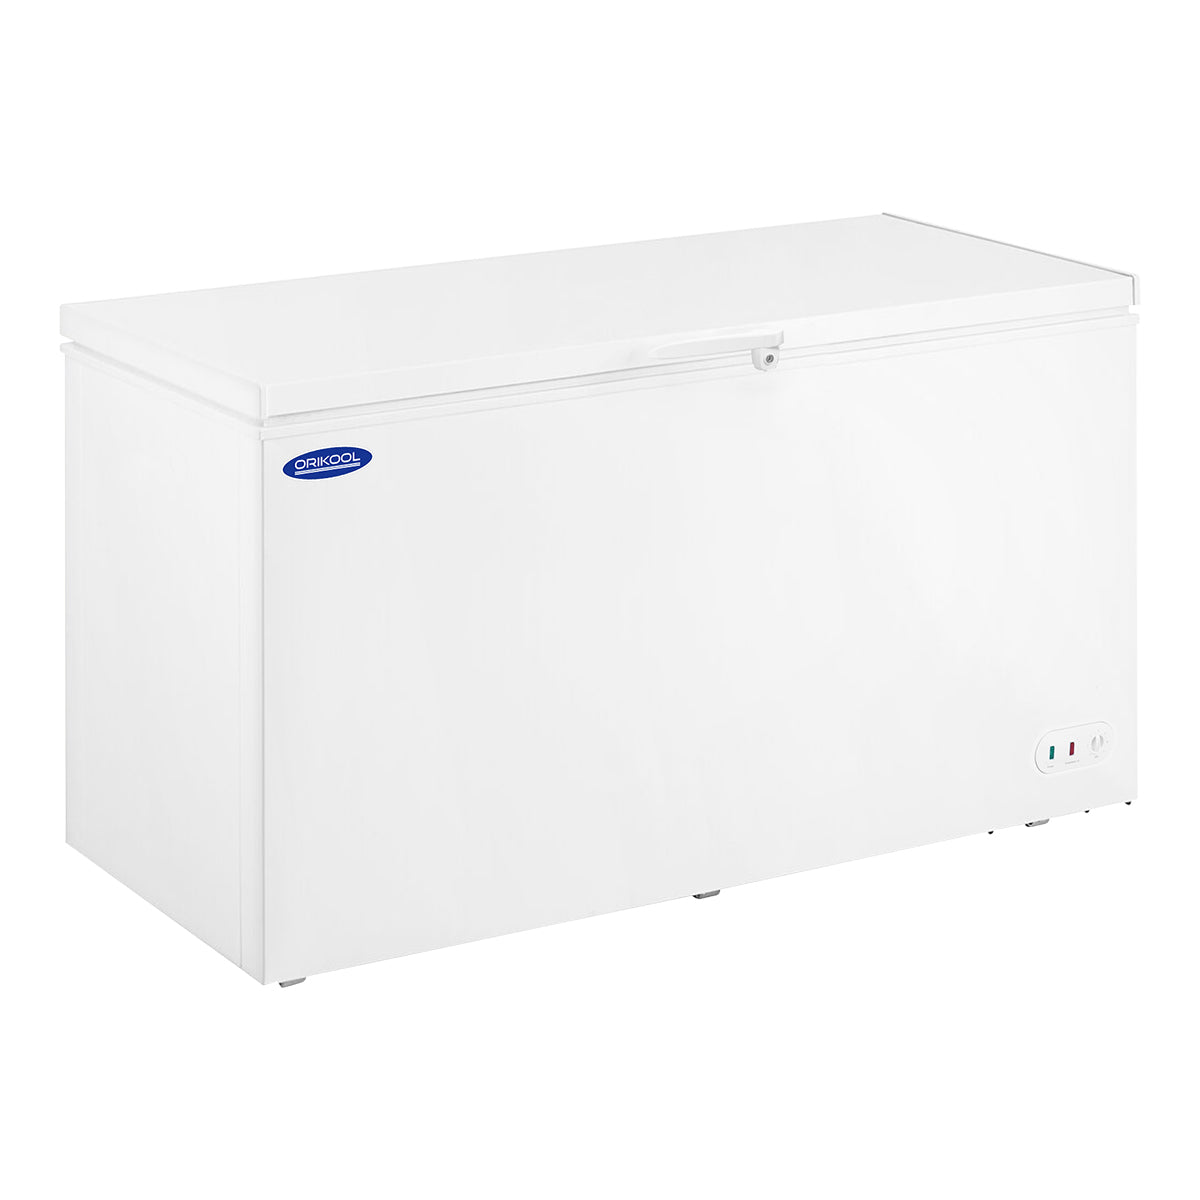 ORIKOOL 60''W Commercial Solid Top Chest Freezer 16.4 cu. ft. White BD550